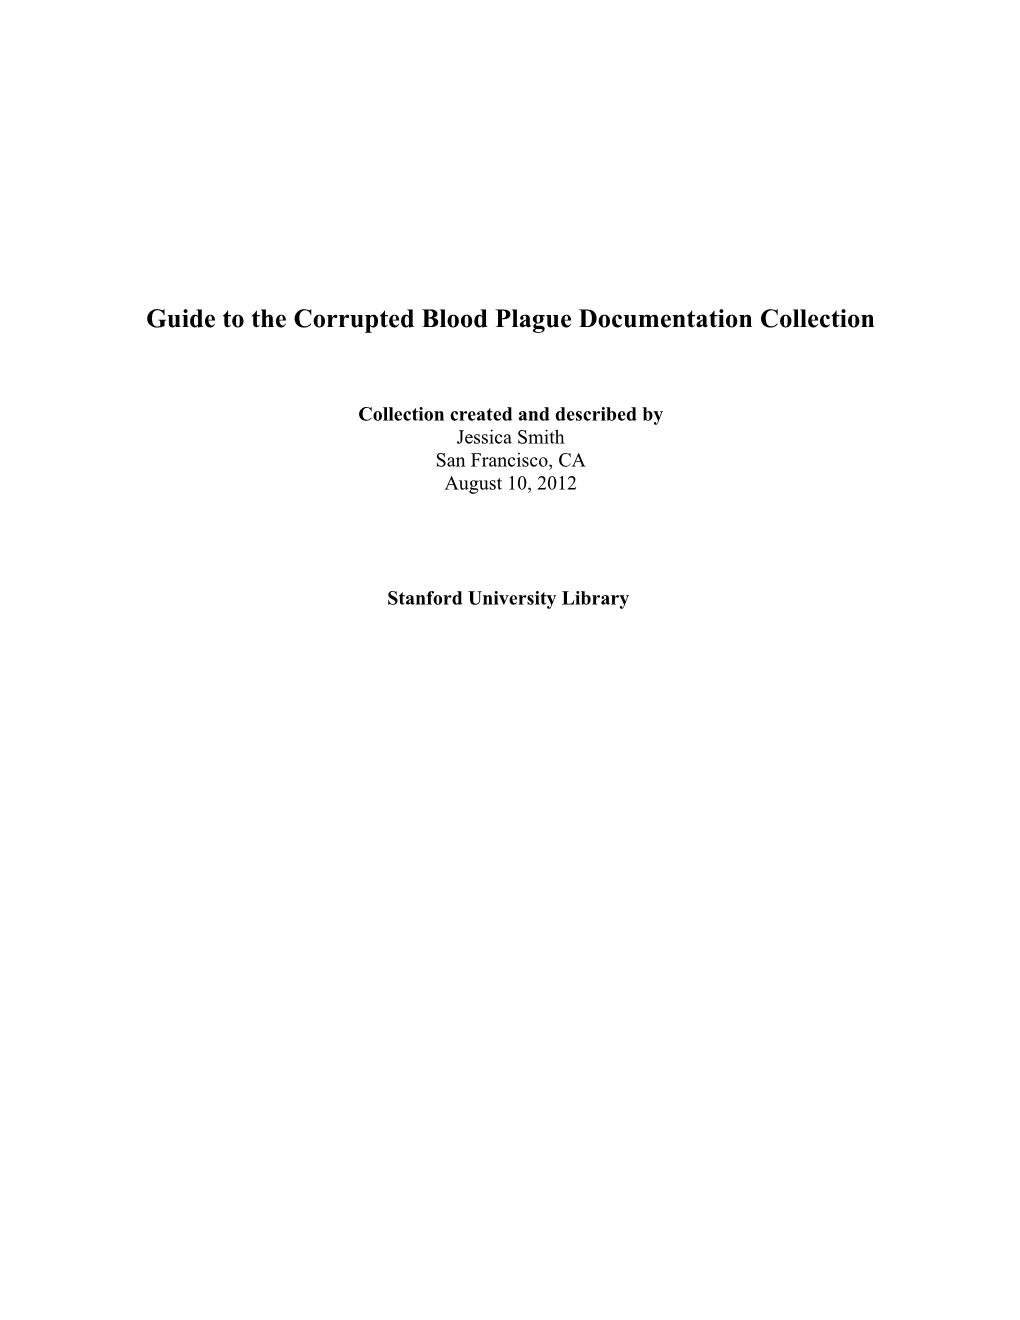 Guide to the Corrupted Blood Plague Documentation Collection